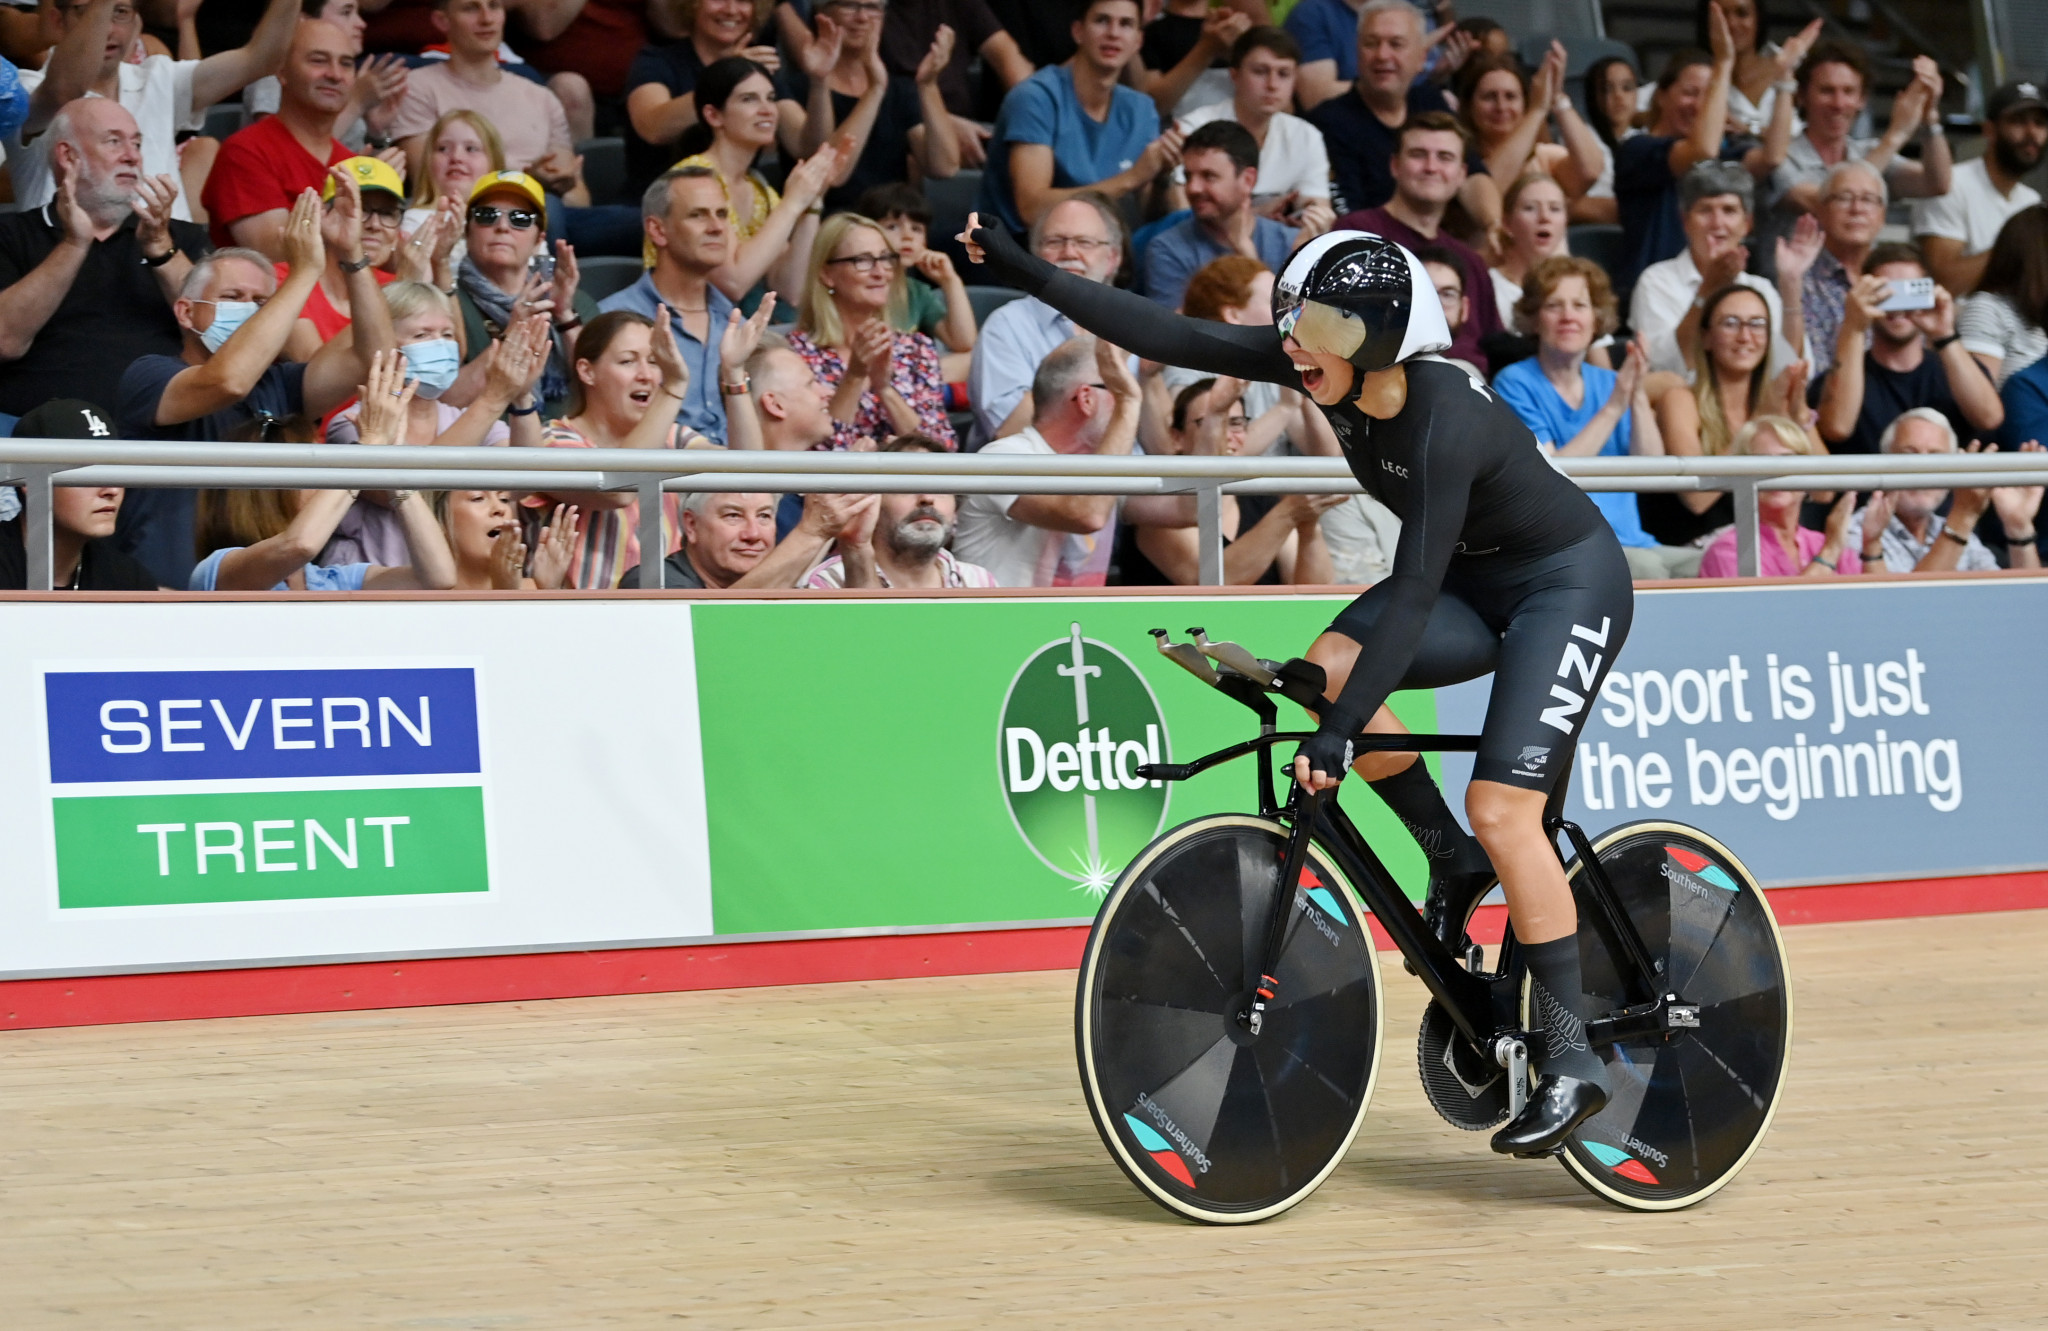 New Zealand won three gold medals today in cycling, including one for Bryony Botha in the individual pursuit ©Getty Images